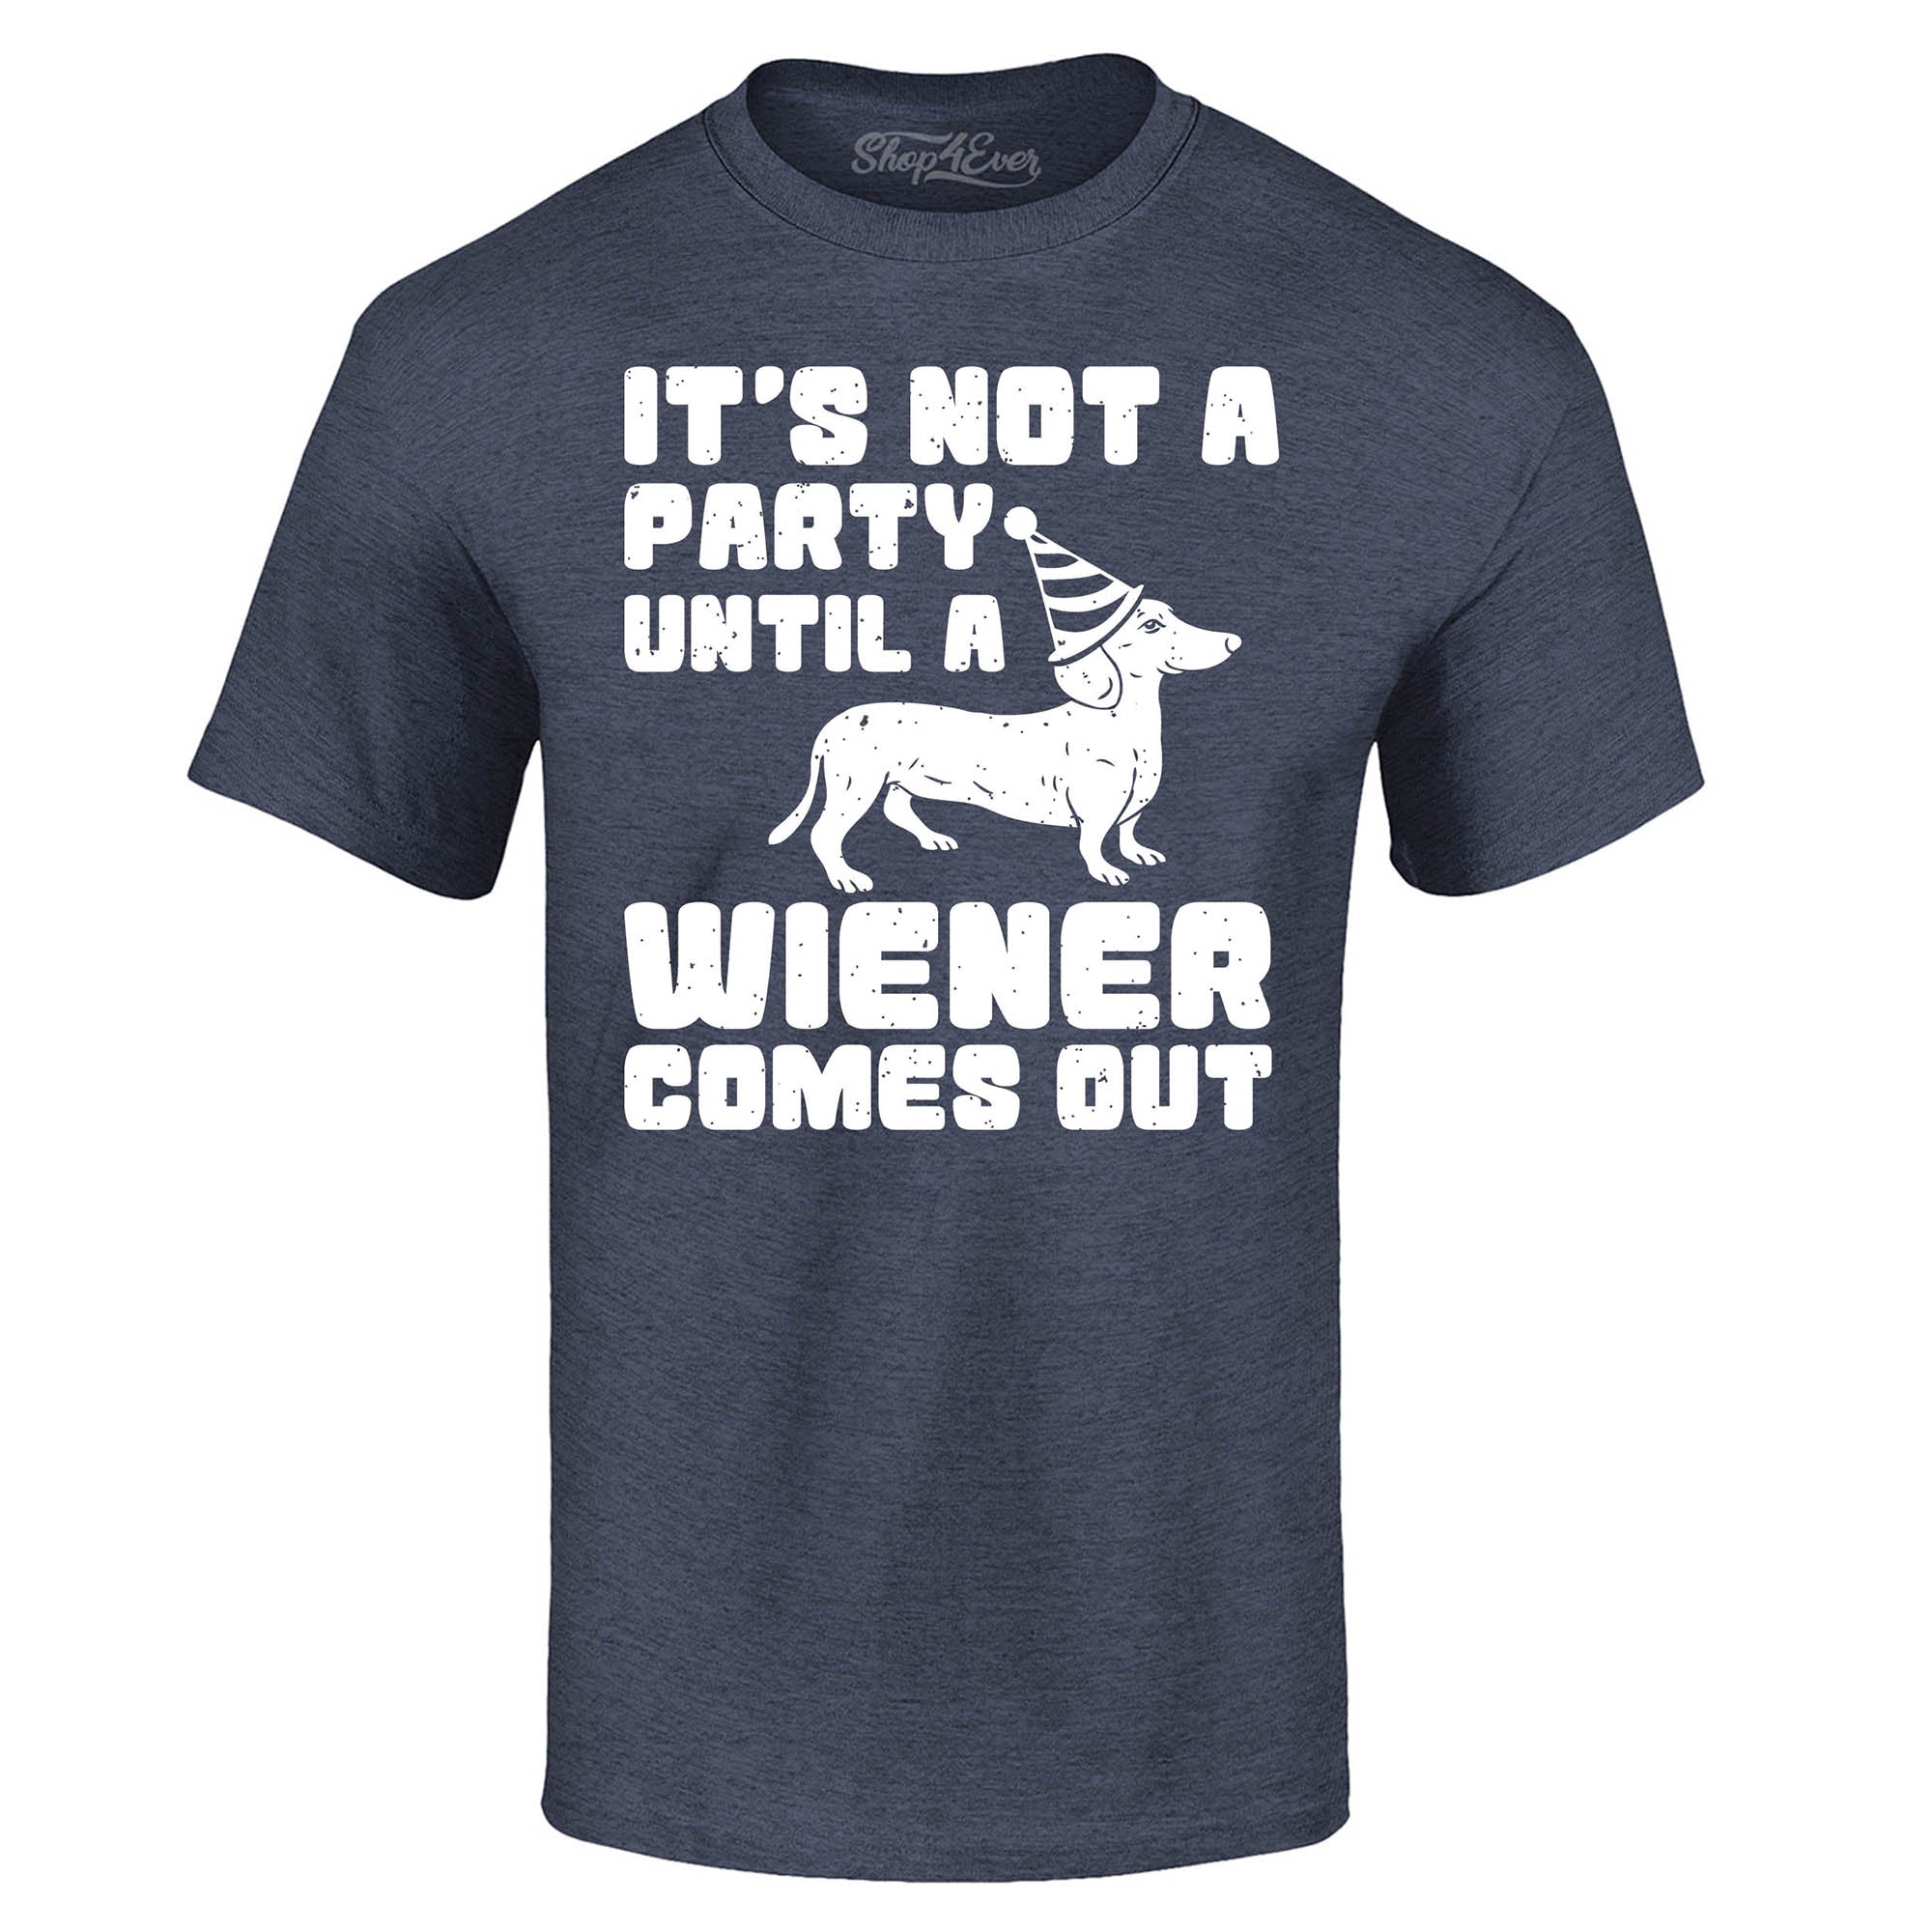 It's Not a Party Until The Wiener Comes Out Funny Dachshund T-Shirt